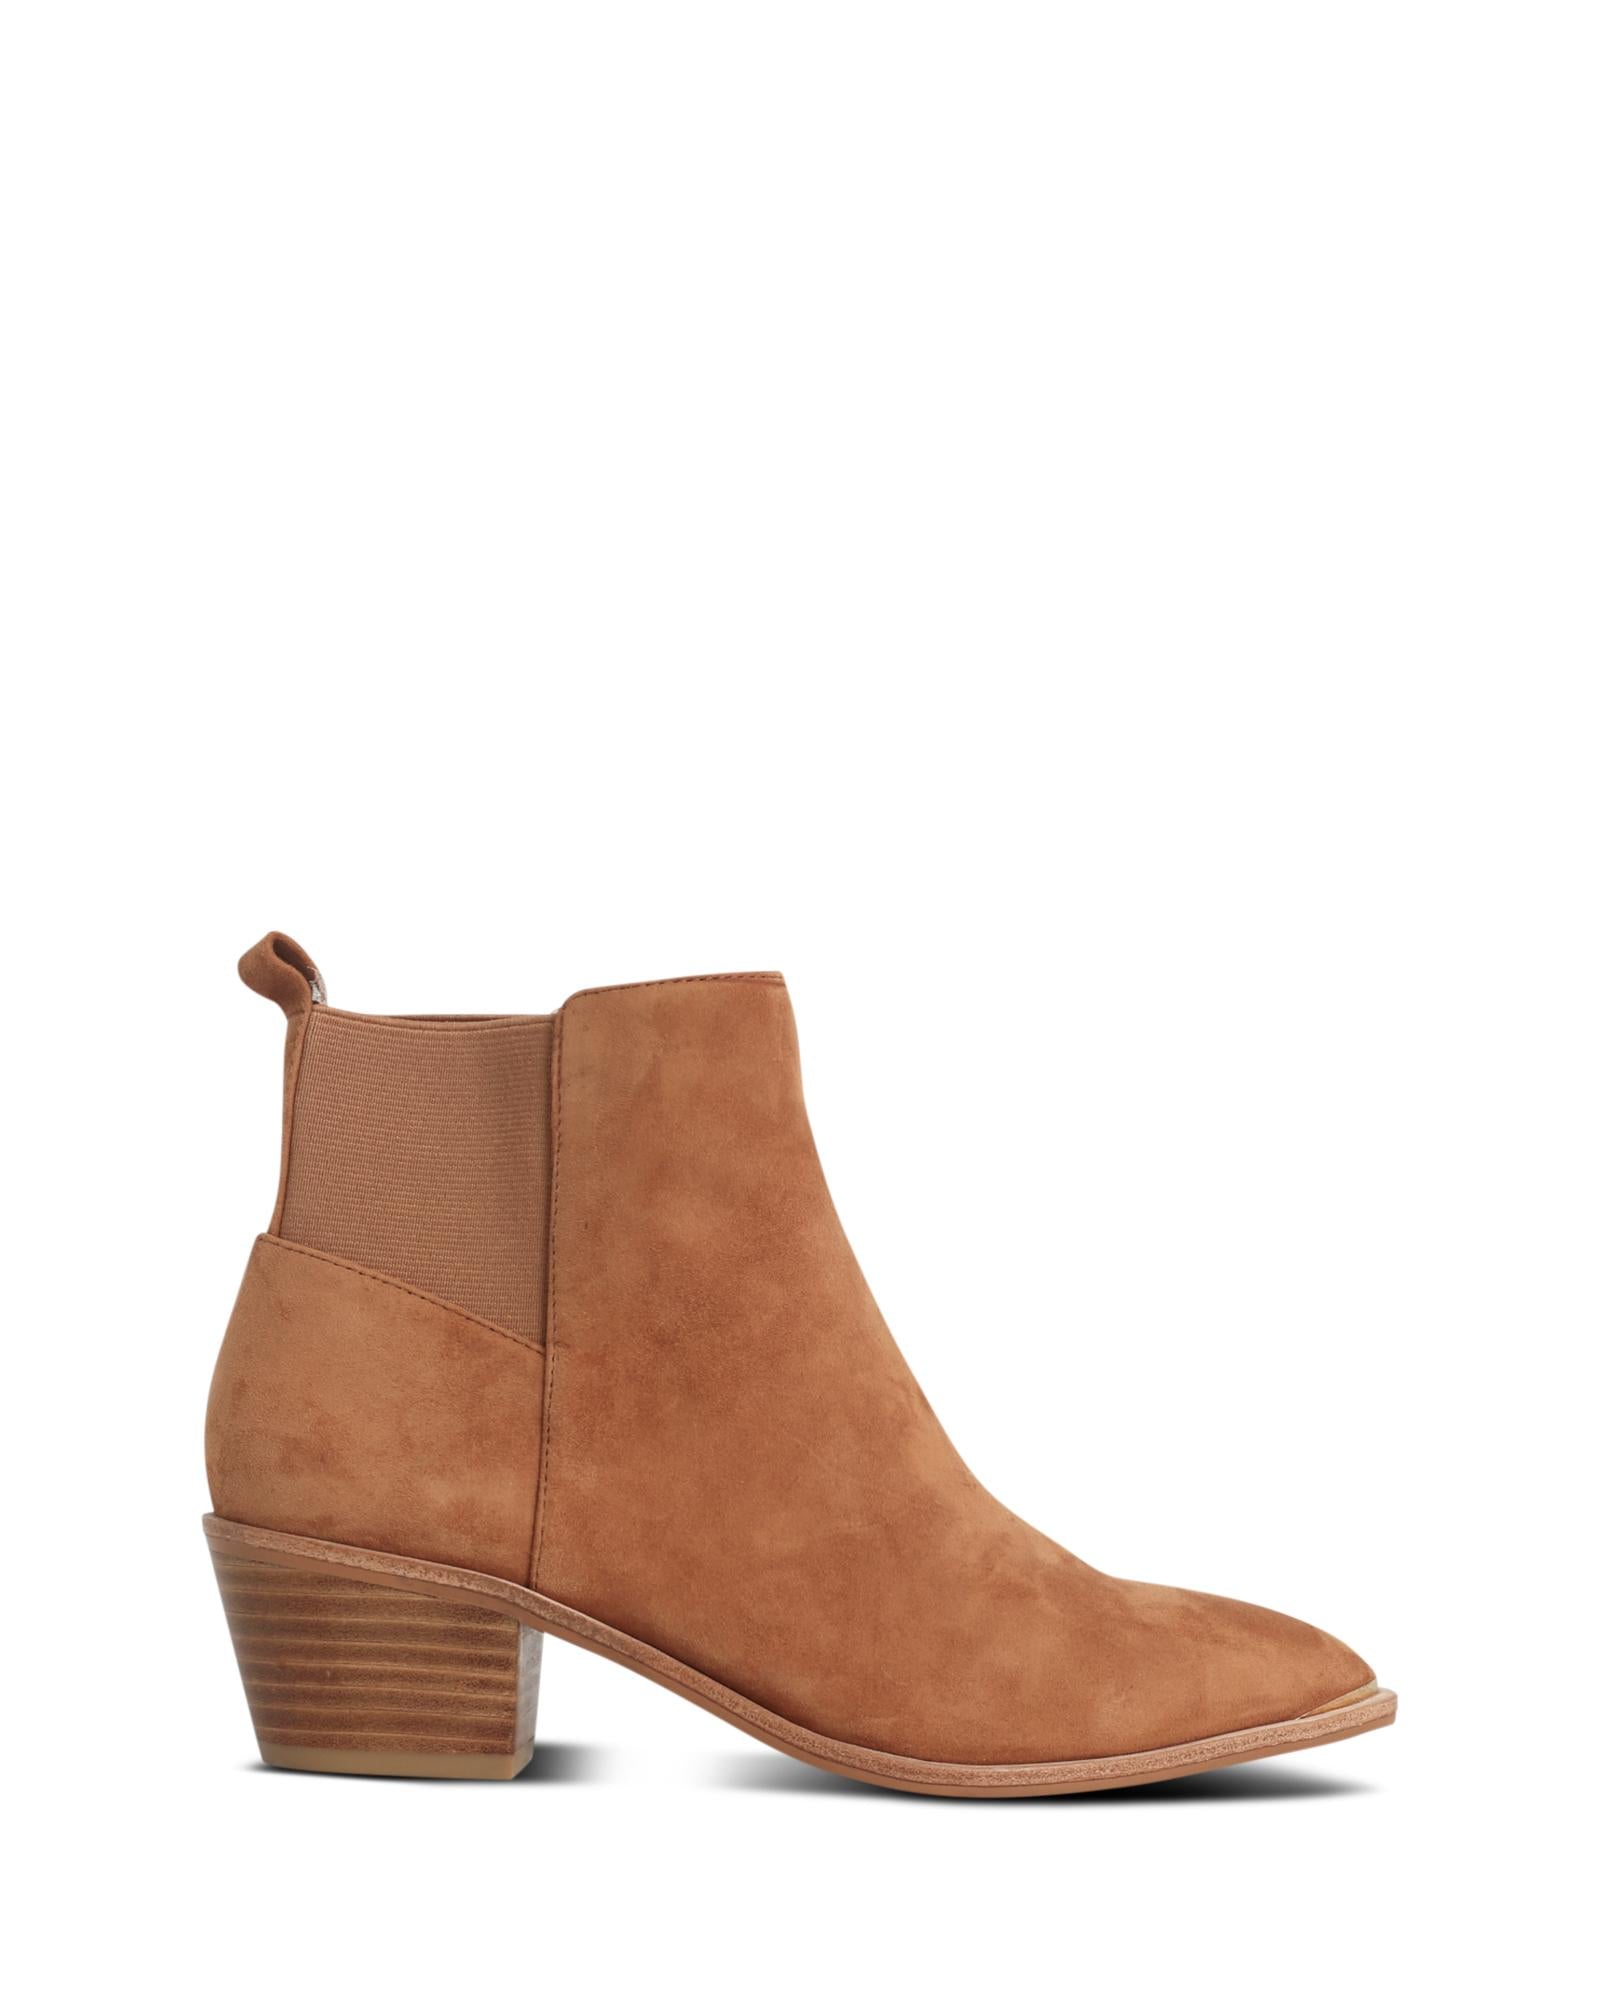 Reese Tan Suede 5cm Cuban Heel Ankle Boot with Elasticated Gusset